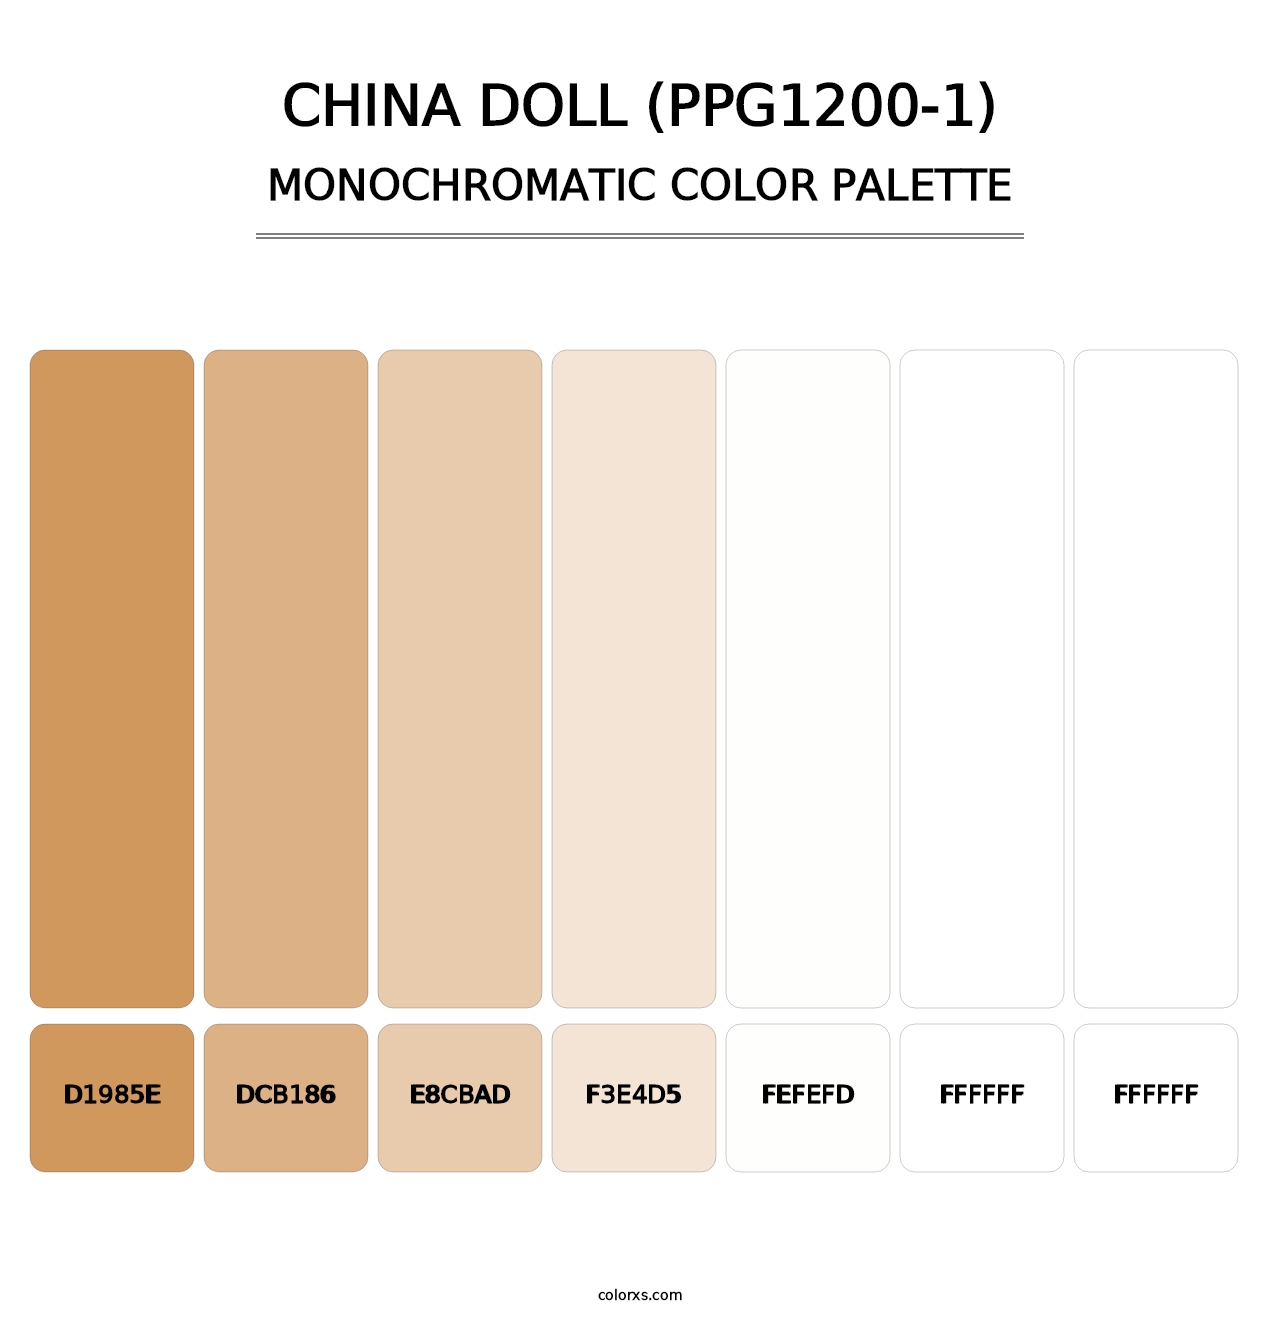 China Doll (PPG1200-1) - Monochromatic Color Palette